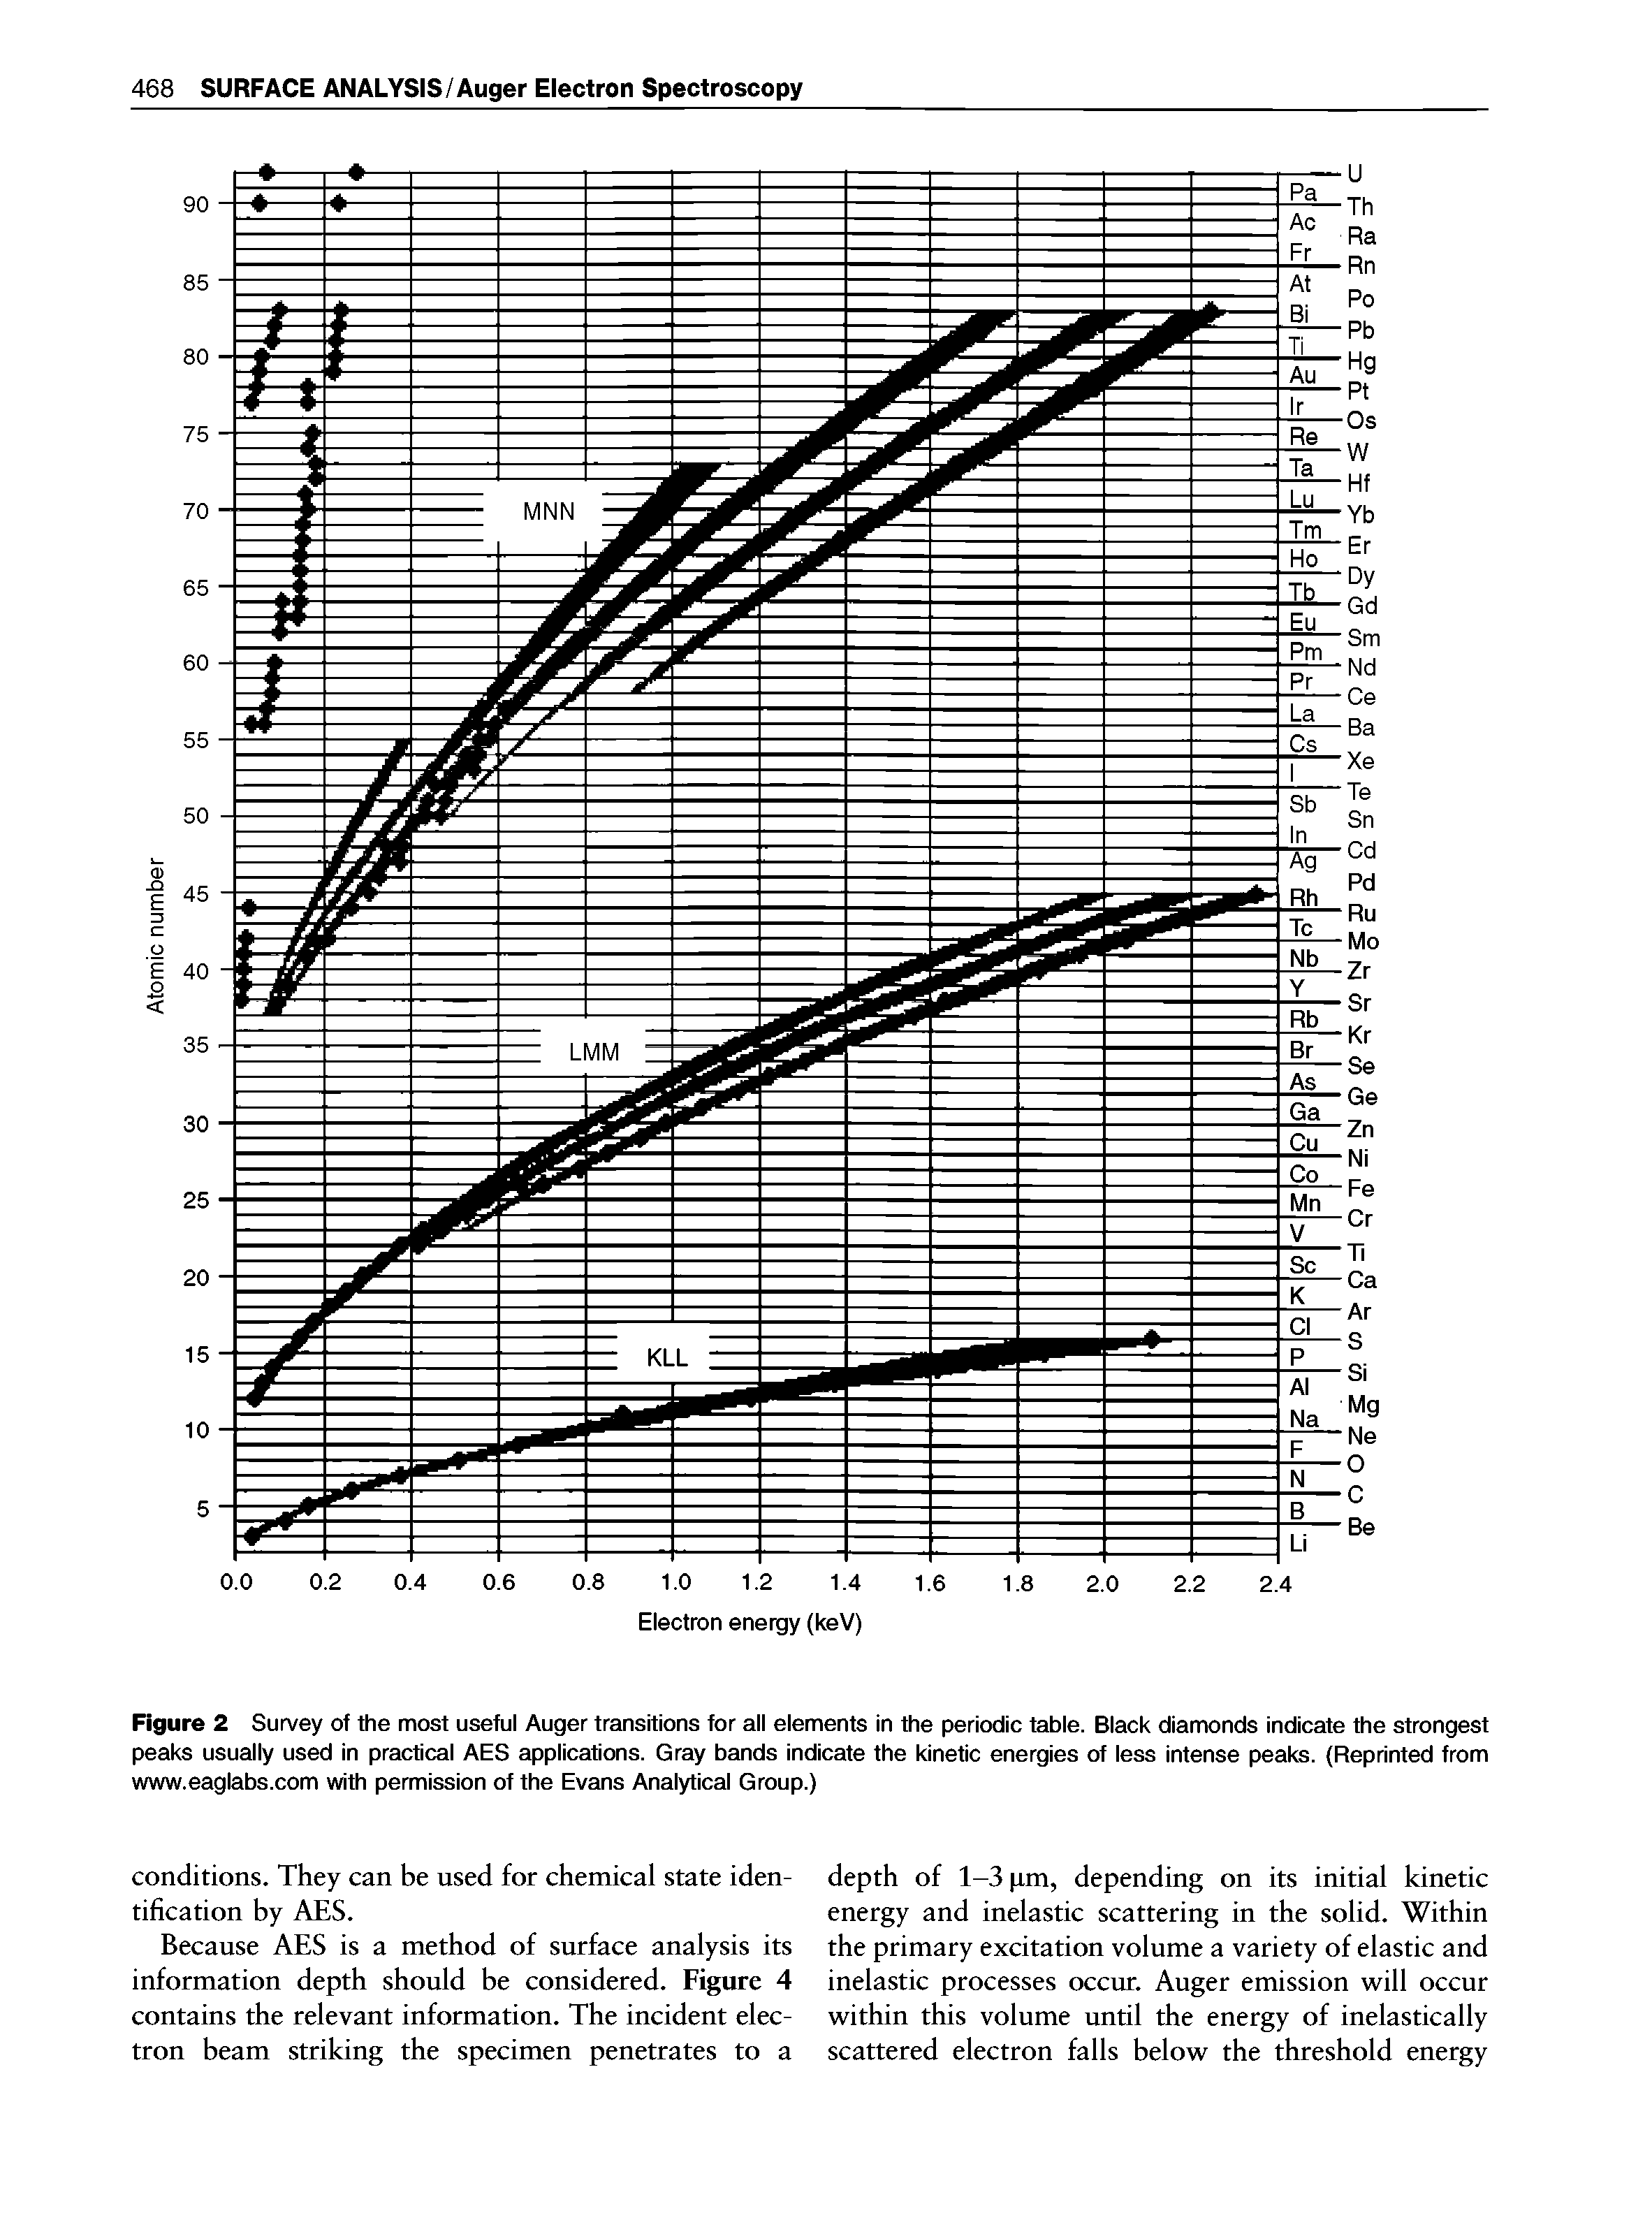 Figure 2 Survey of the most useful Auger transitions for all elements in the periodic table. Black diamonds indicate the strongest peaks usually used in practical AES applications. Gray bands indicate the kinetic energies of less intense peal . (Reprinted from www.eaglabs.com with permission of the Evans Analytical Group.)...